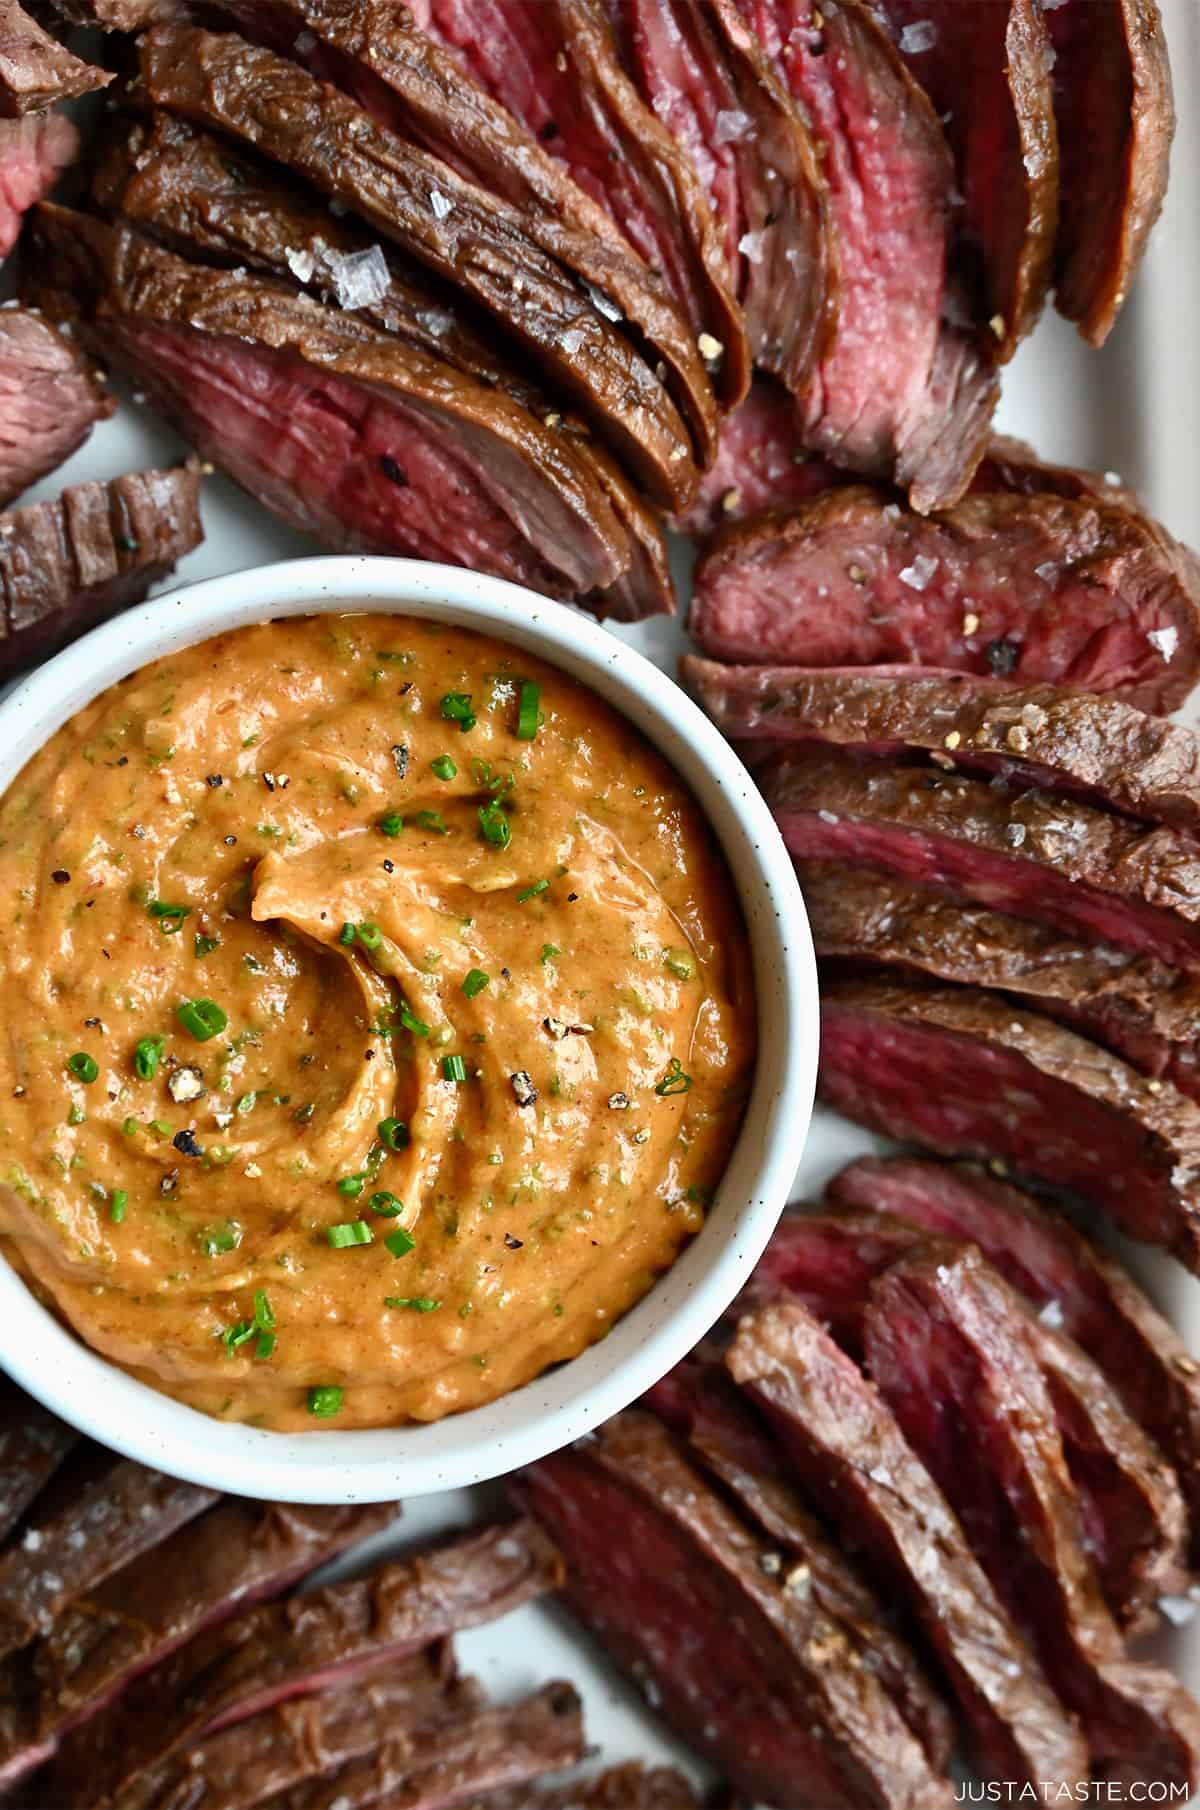 A close-up view of cowboy butter in a small white bowl on a plate surrounded by sliced flank steak.